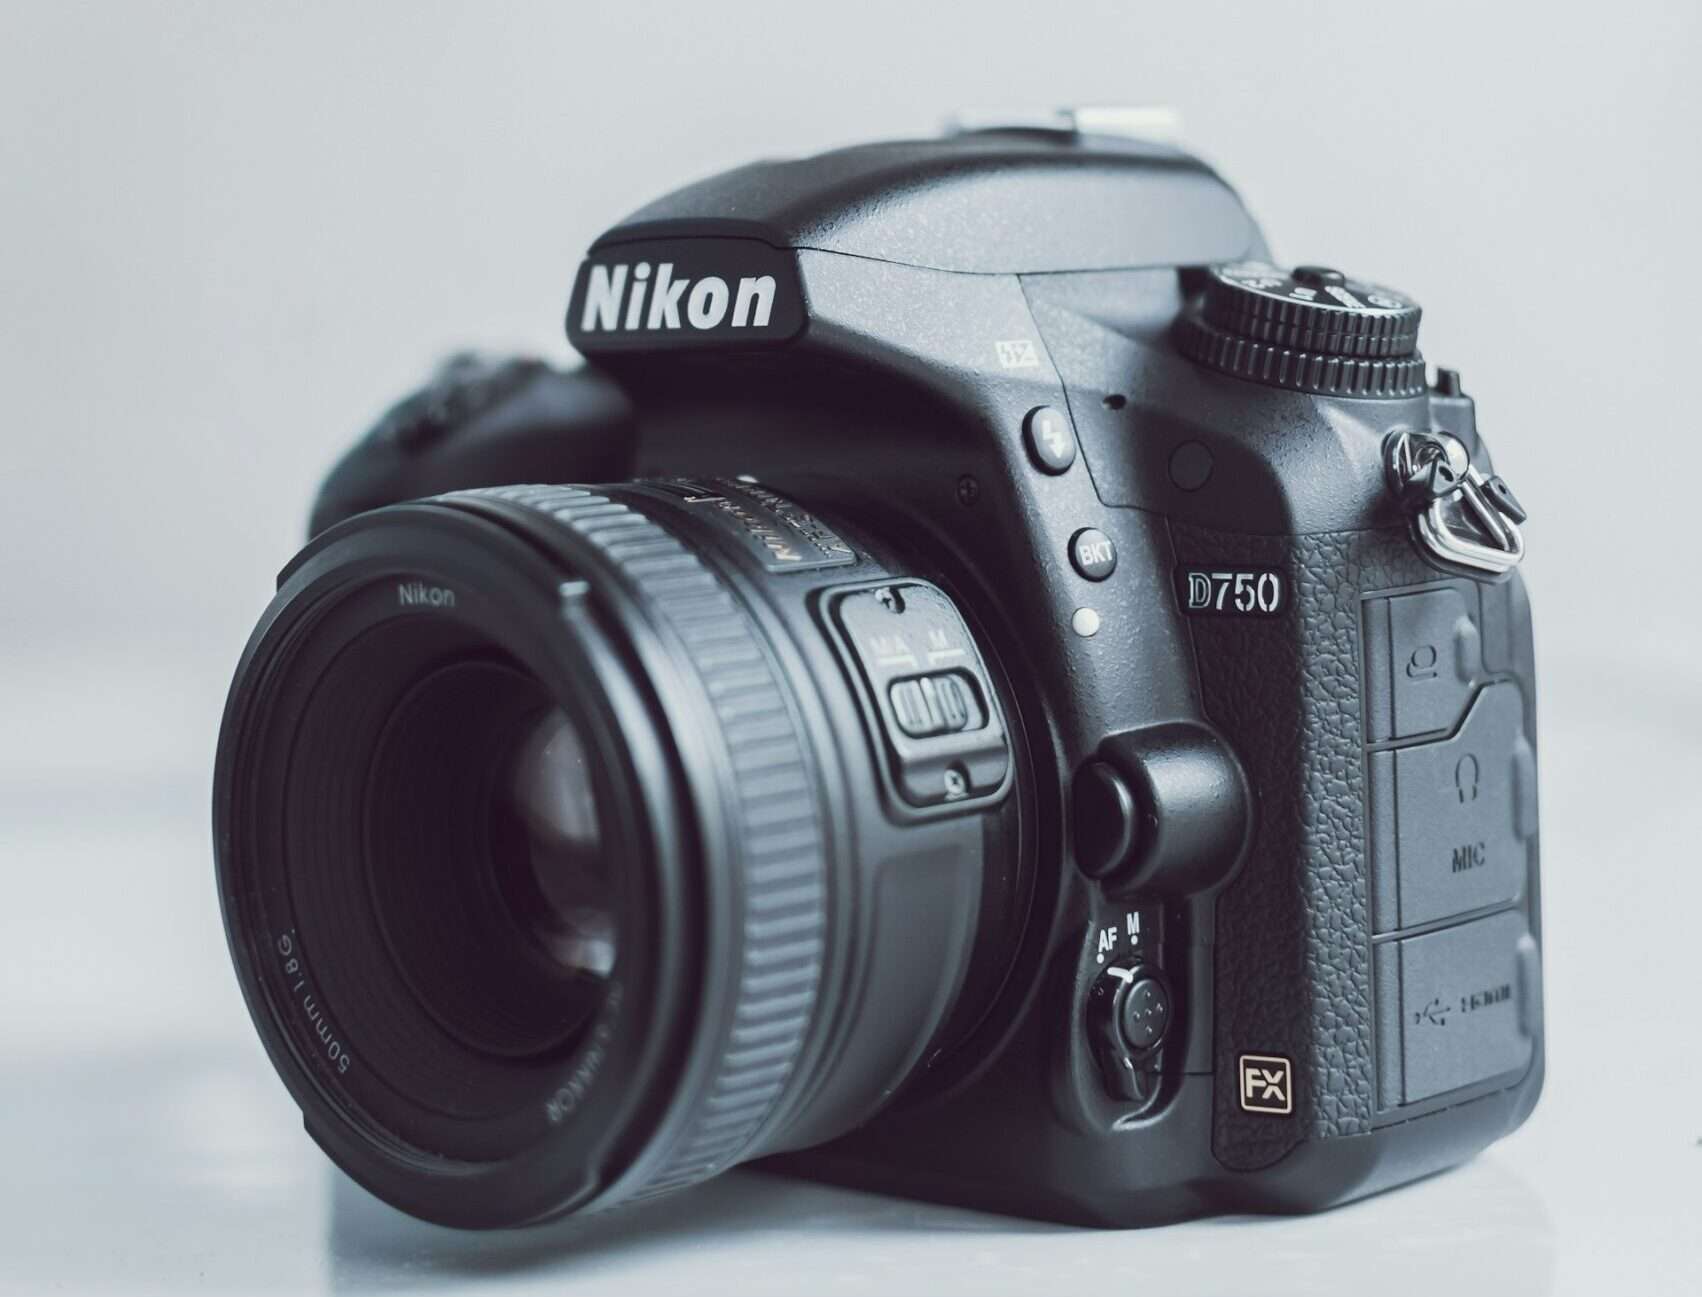 How to Use Nikon D750